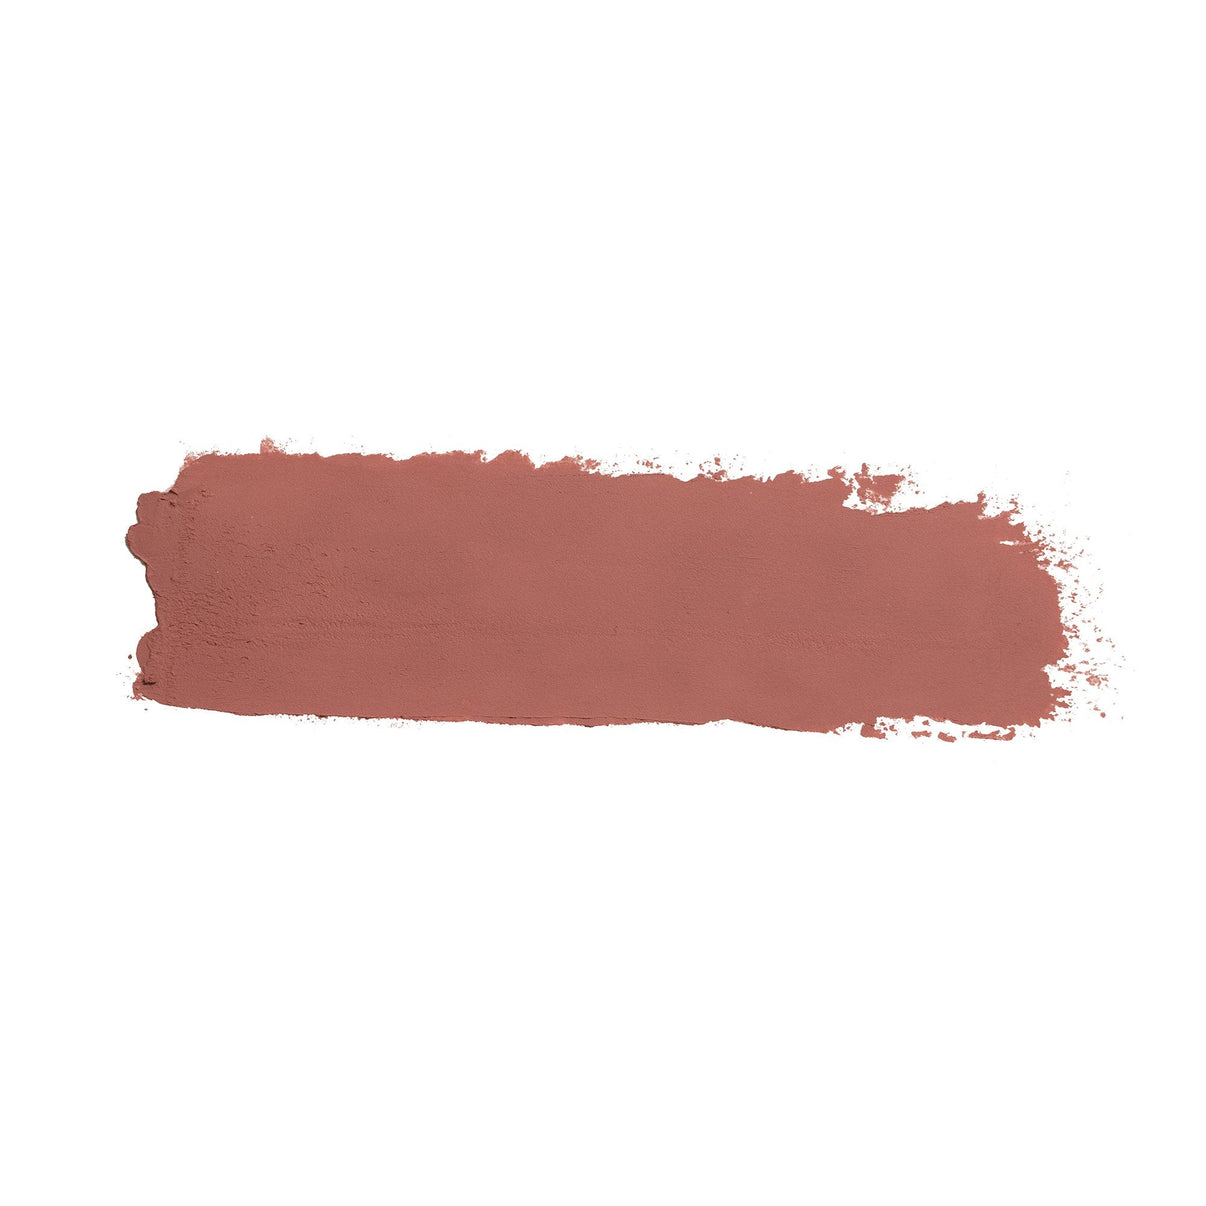 rose texture swatch